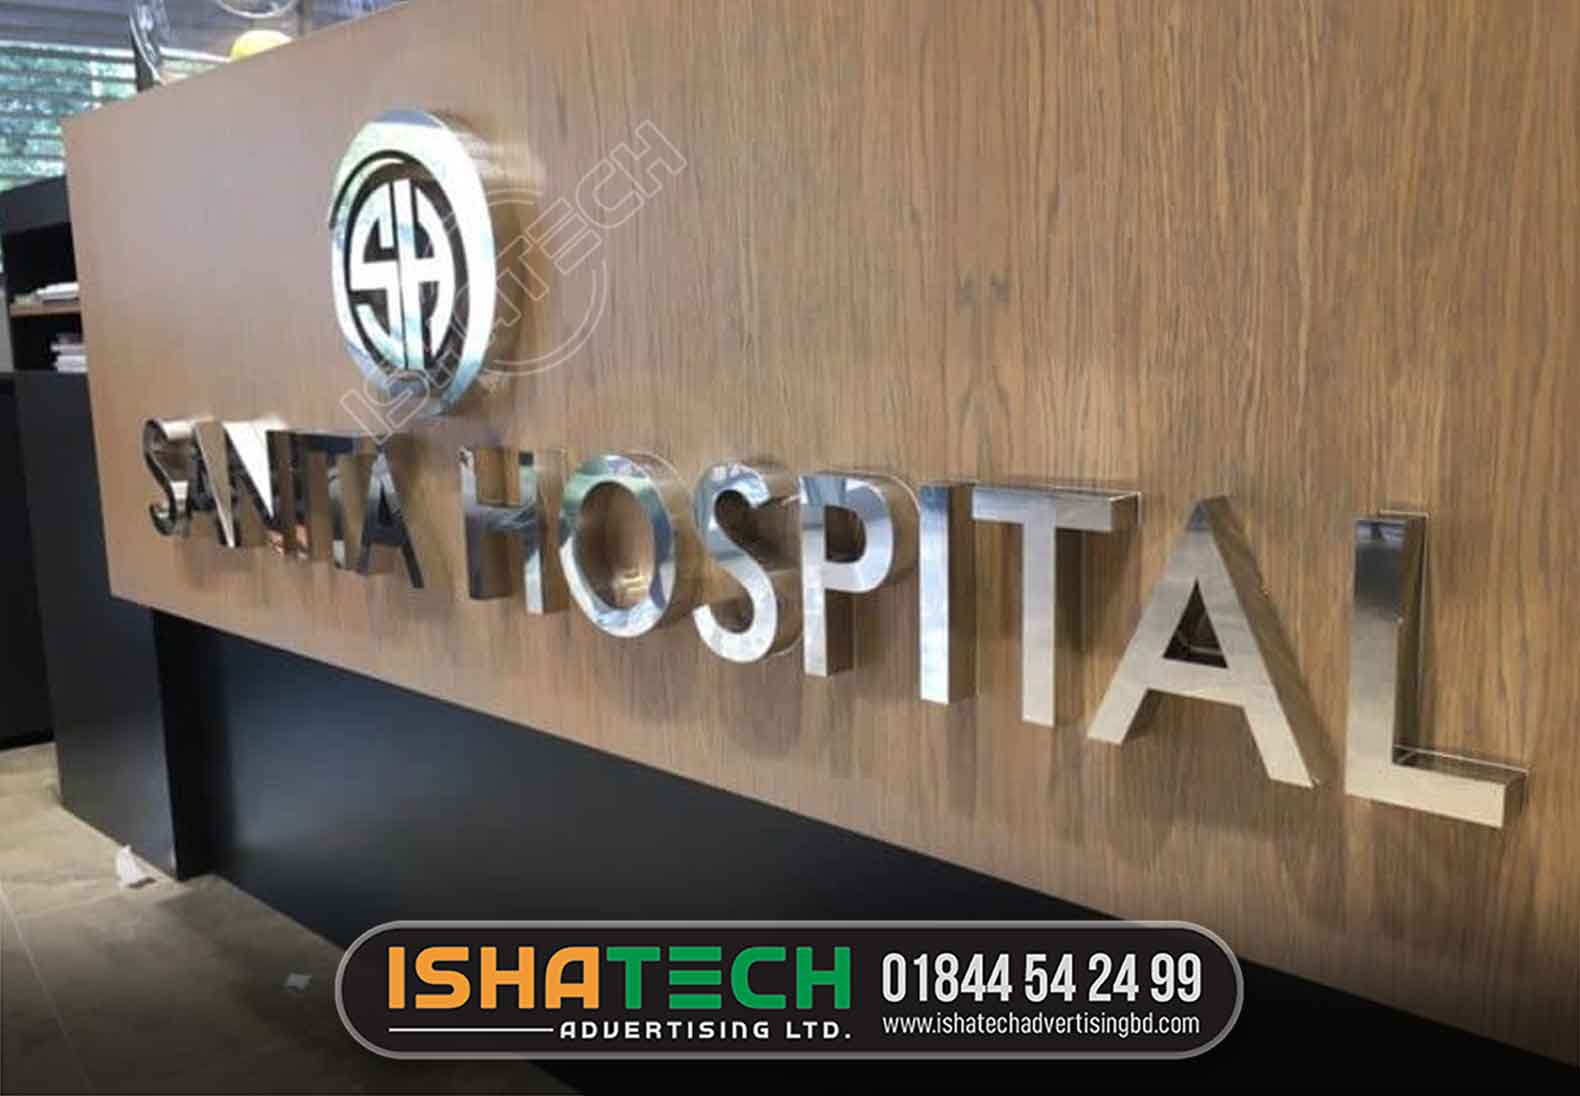 SANITA HOSPITAL SS LOGO AND LETTER NAMEPLATE MAKING BY ISHATECH ADVERTISING LTD, SS LETTER MAKING BD, SS METAL LETTER ON WOODEN LETTER SIGNAGE BD